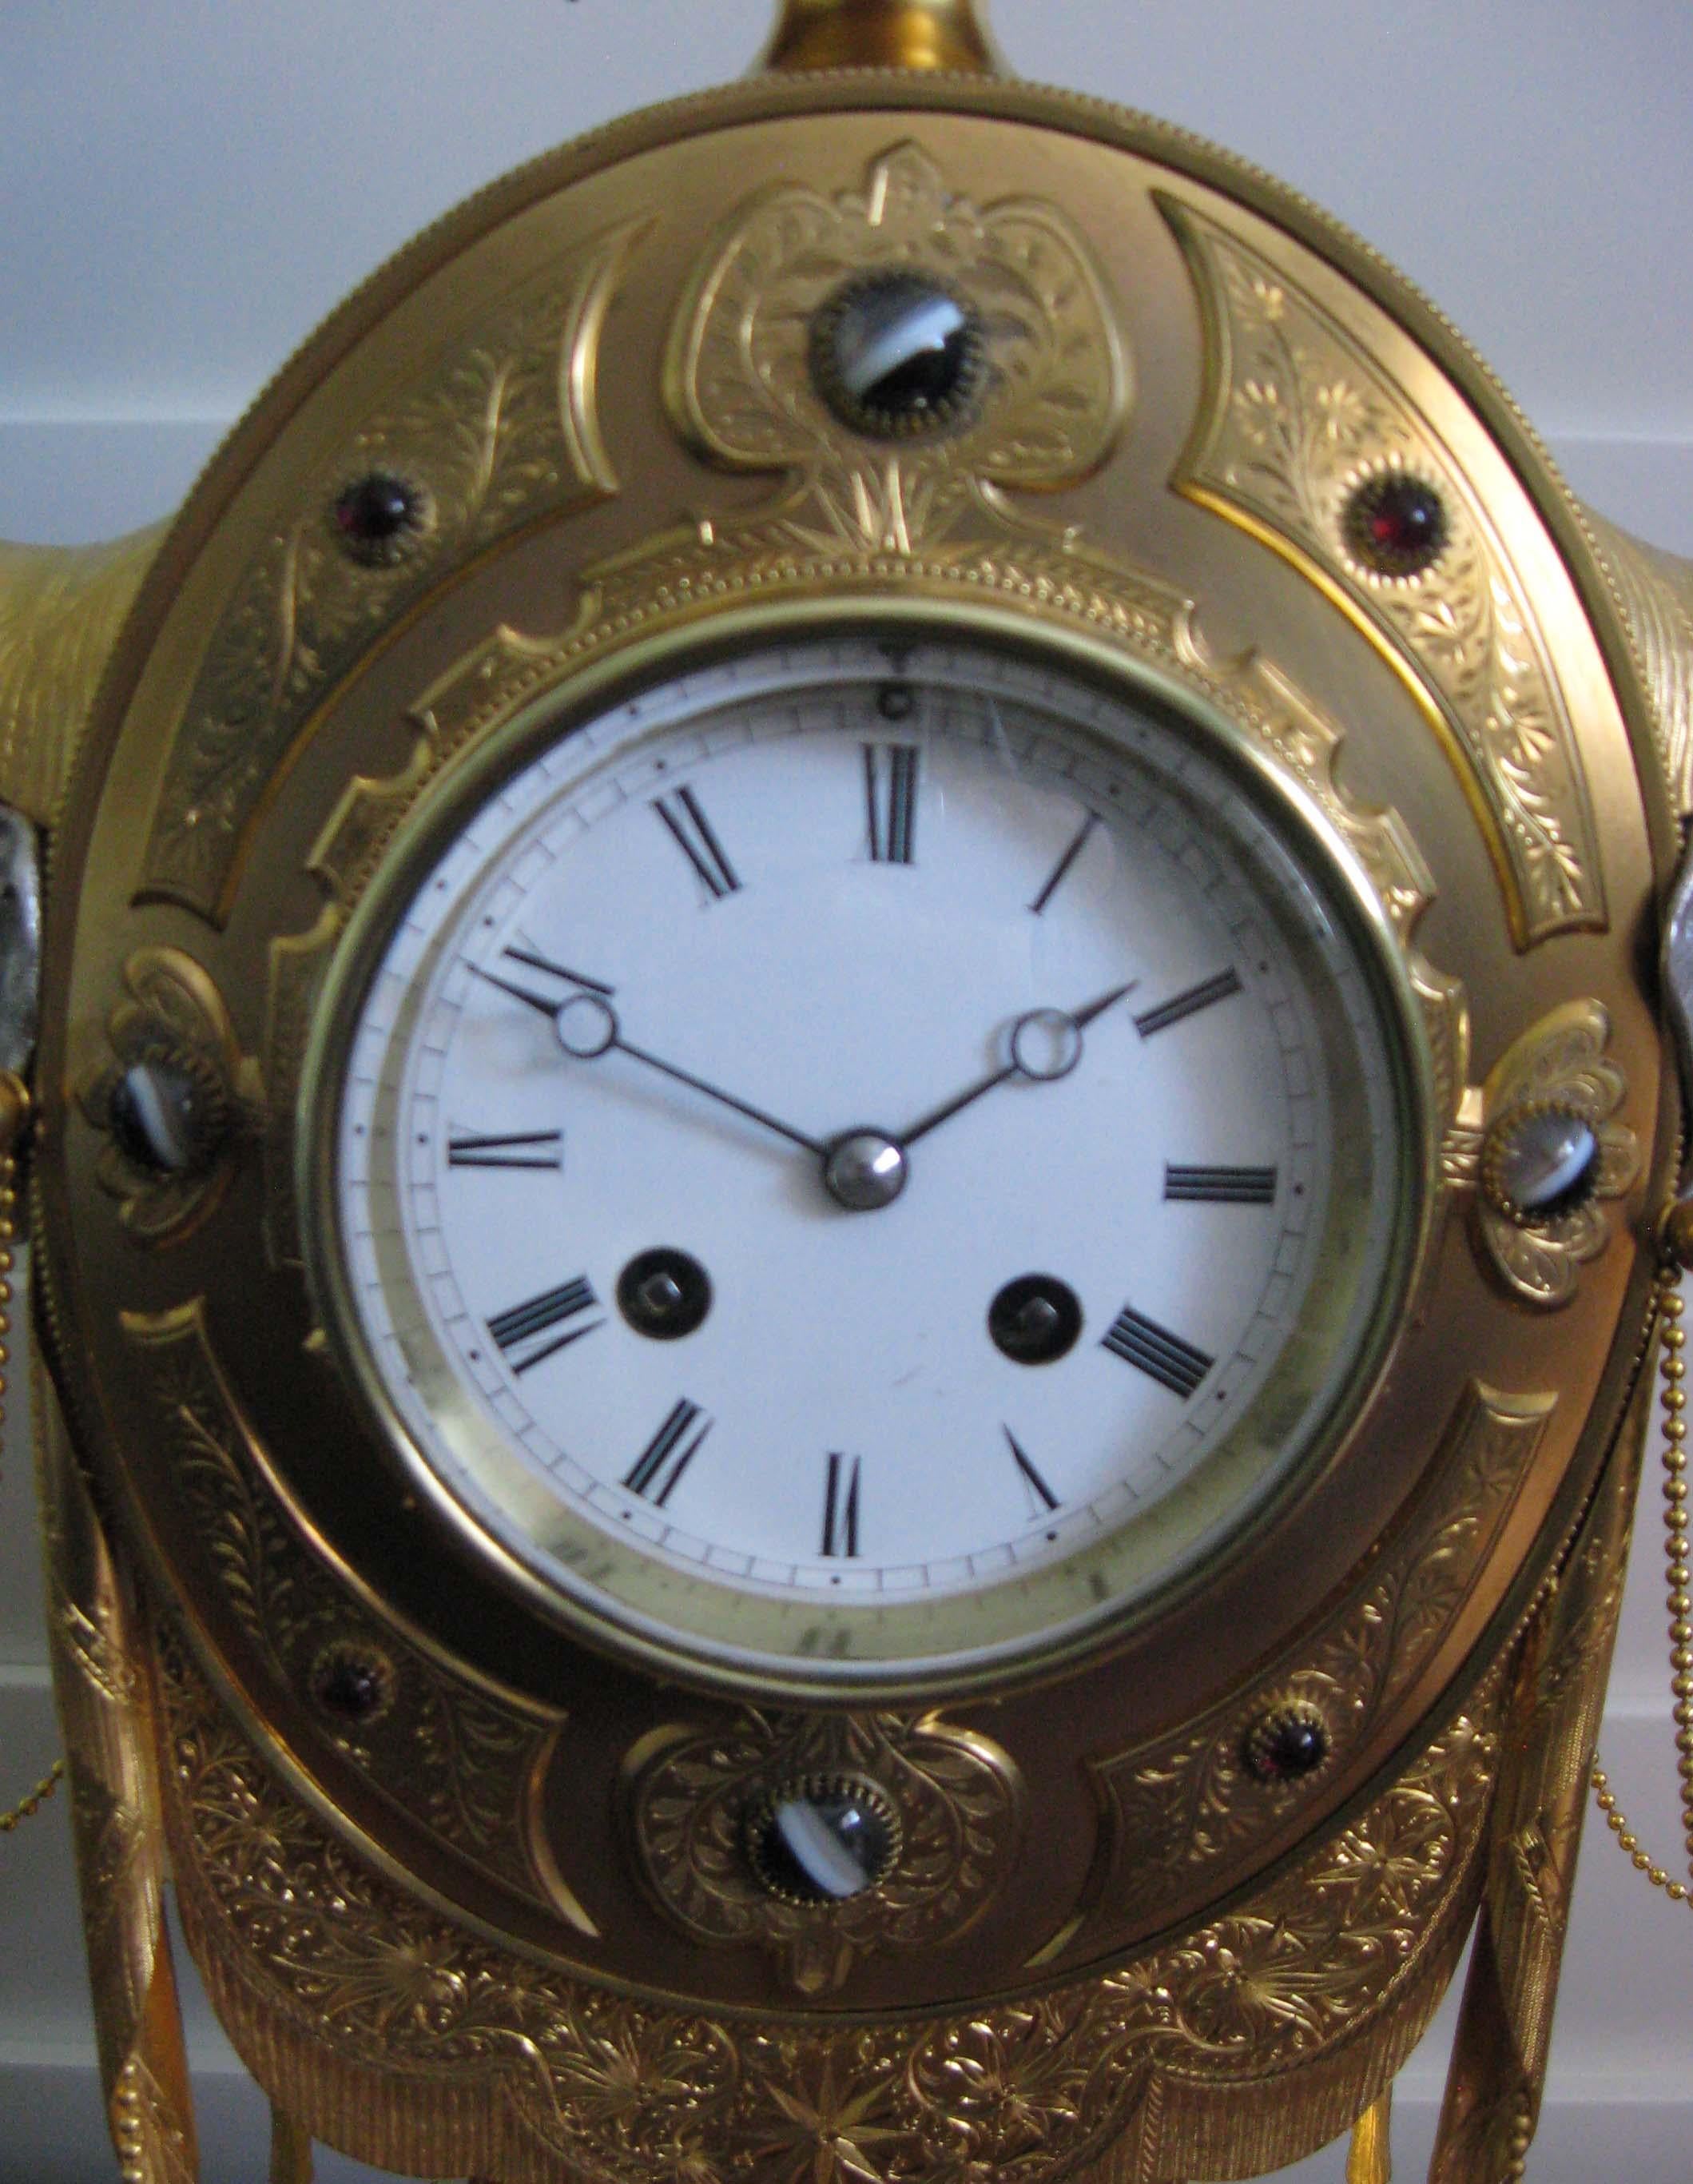 A beautiful English hard stone gilt bronze and silvered mantel clock, late 19th century, attributed to Howell James, the design by E Finley, circa 1871. Possibly made for the Turkish market.
  
The clock surmounted by a minaret with moon crescent